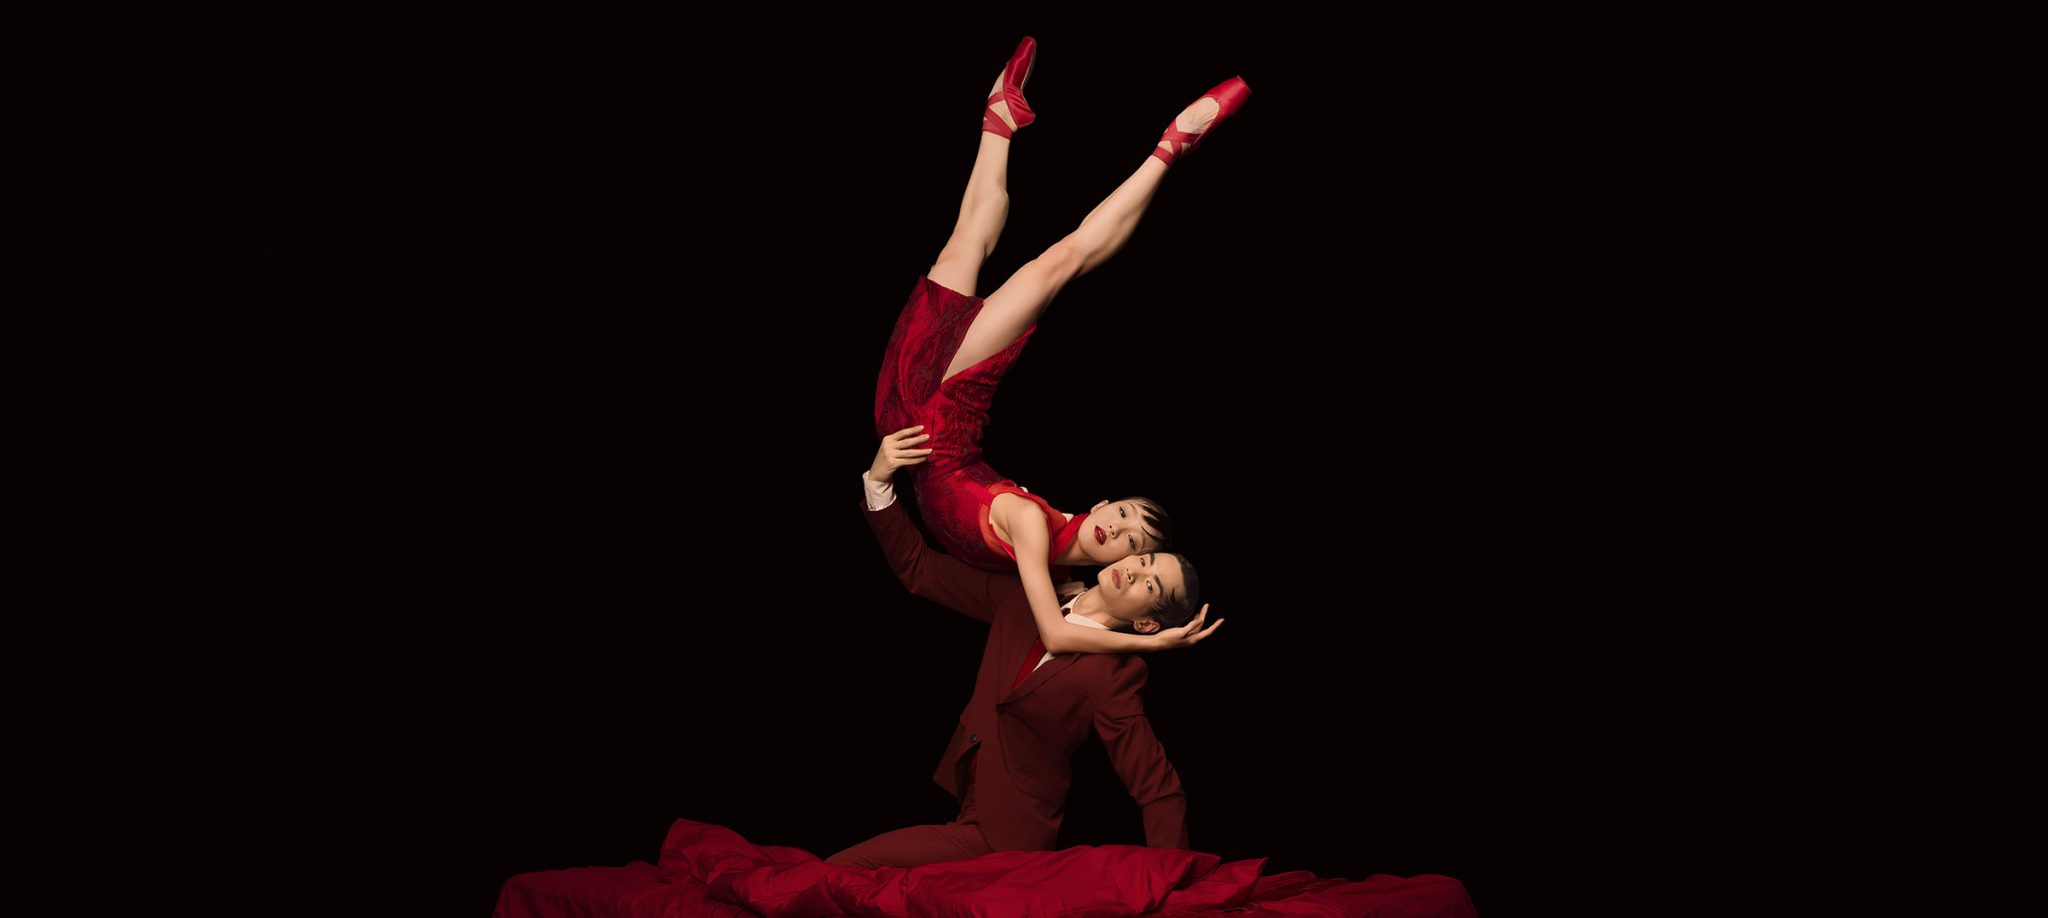 Male and female ballet dancers in intertwined pose on stage